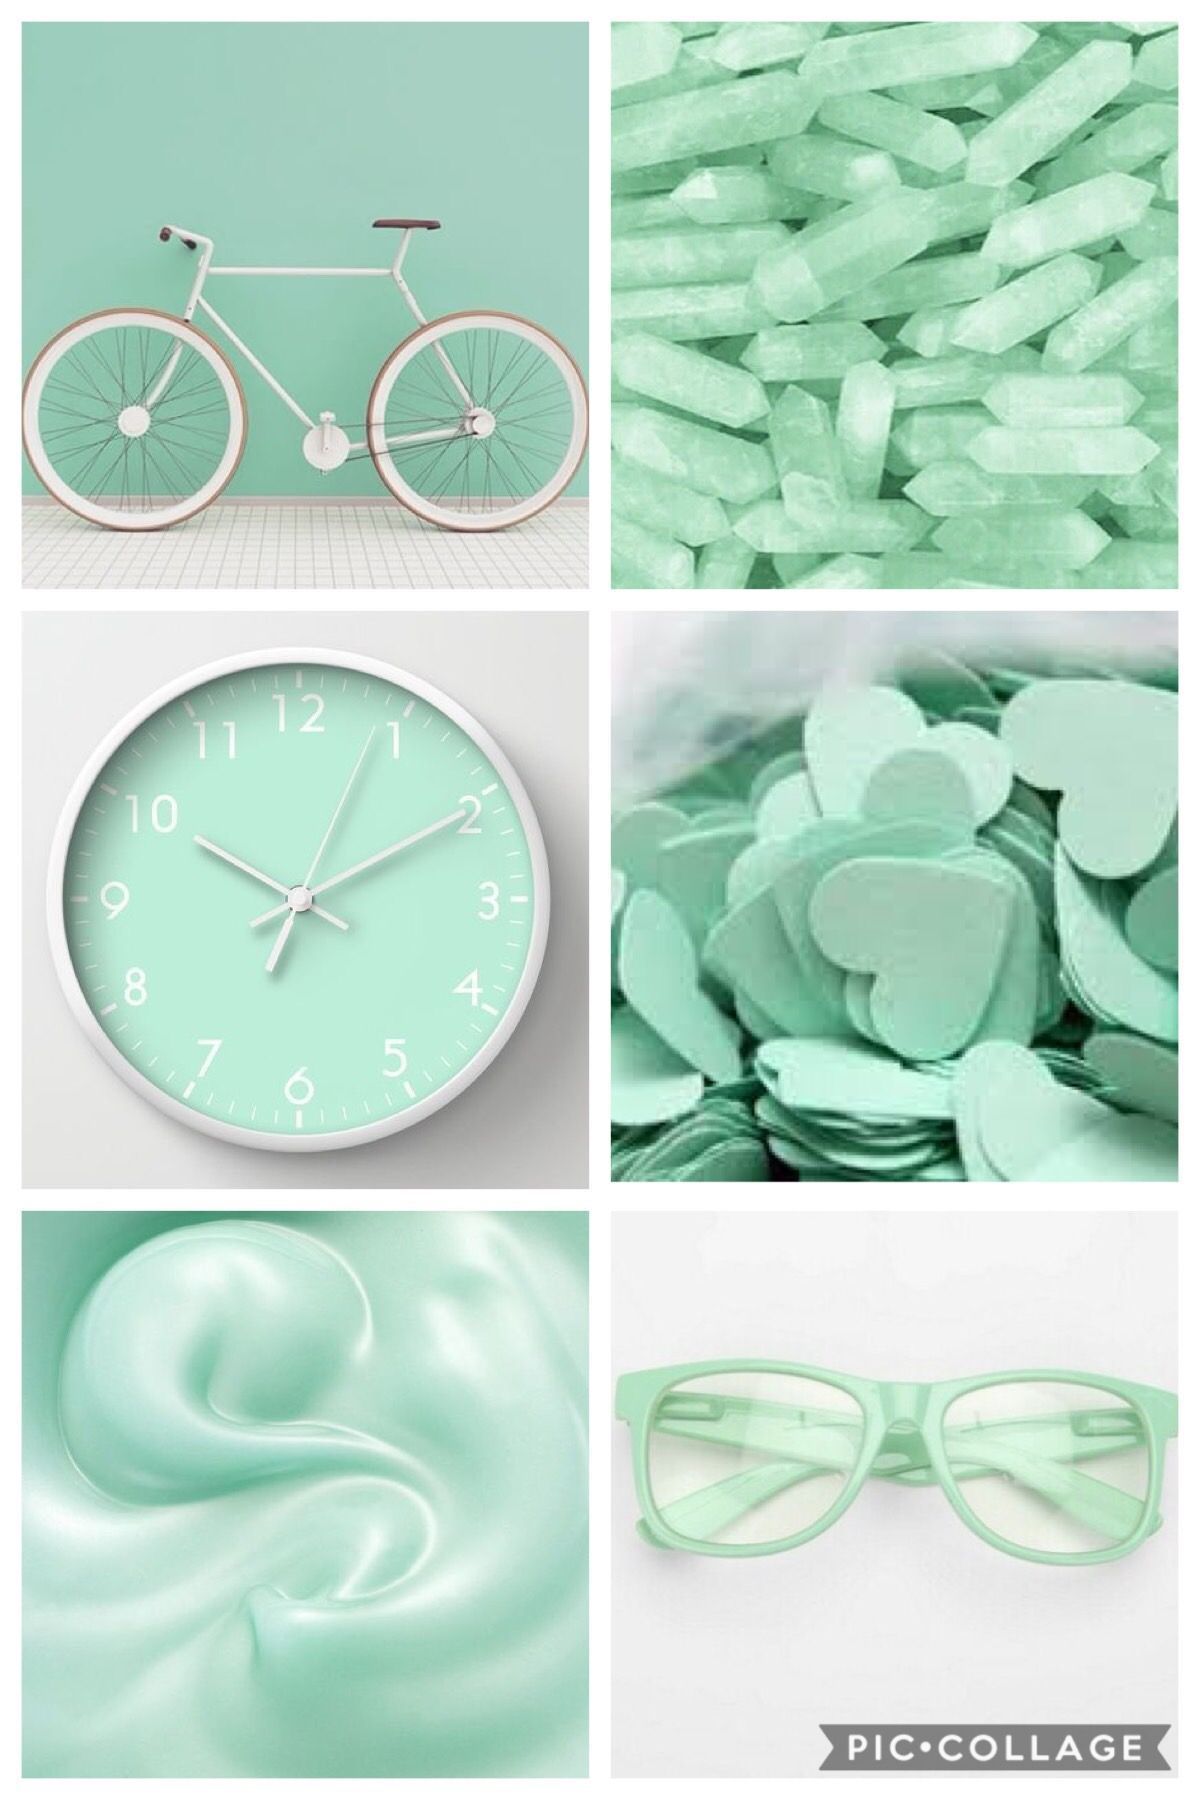 Pastel Green Aesthetic Wallpapers On Wallpaperdog Green black aesthetic blue aesthetic red aesthetic. pastel green aesthetic wallpapers on